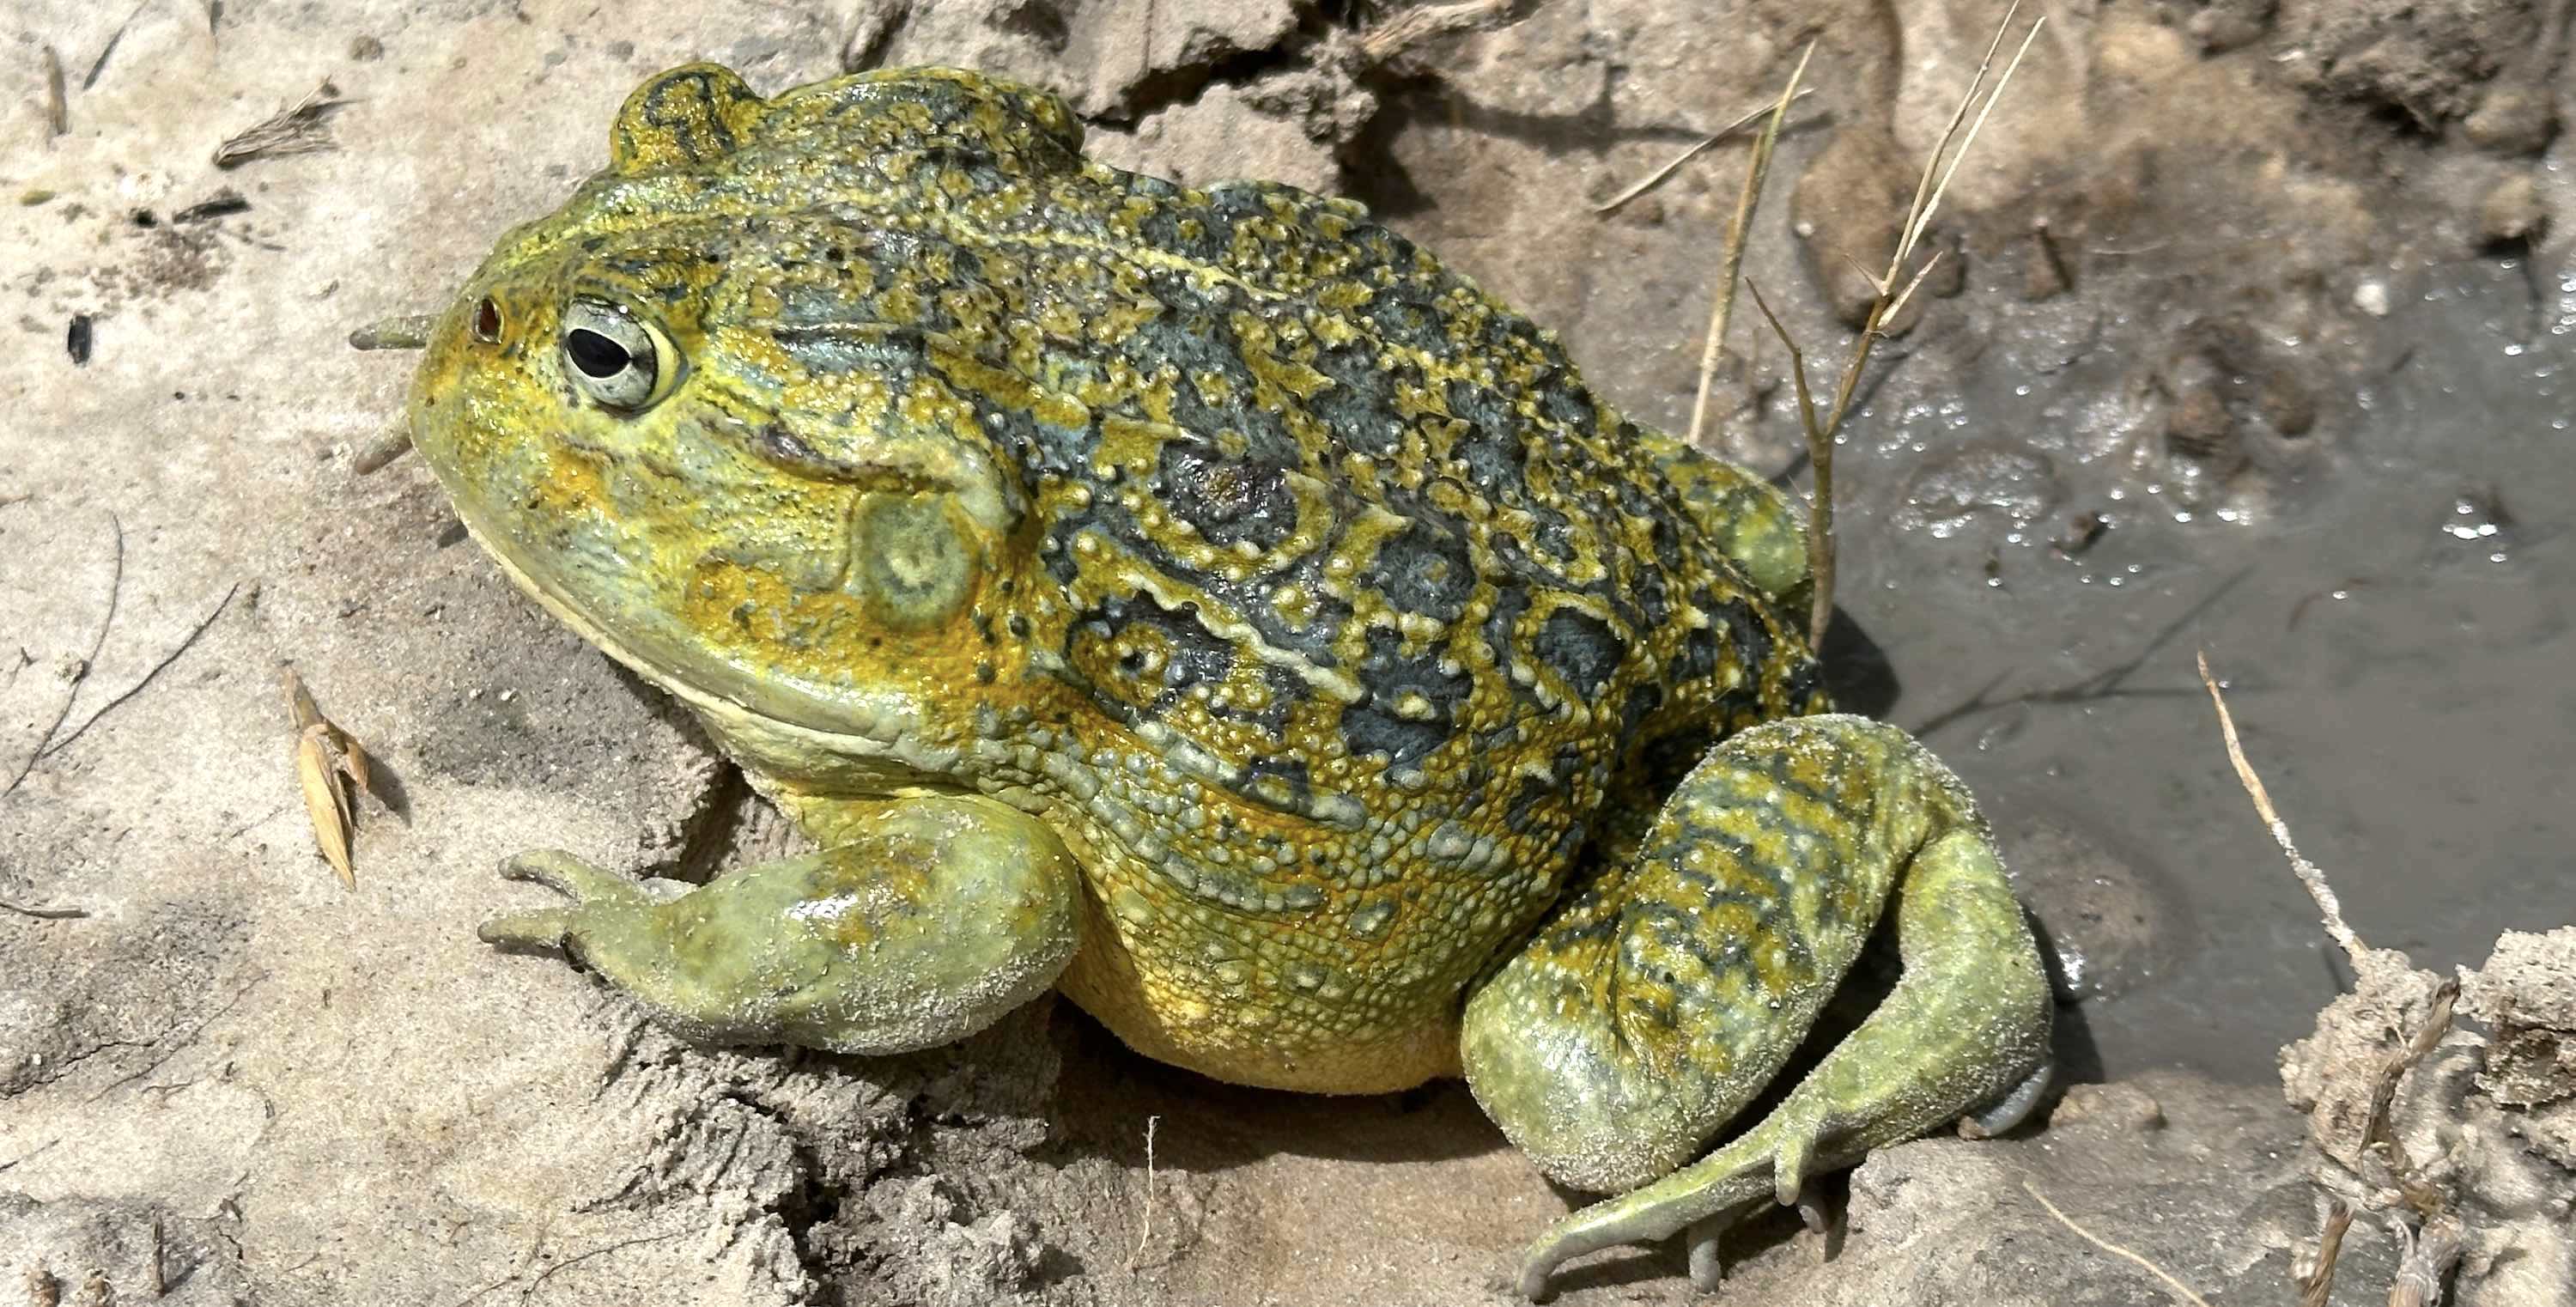 A large green, yellow, and black bullfrog sits in the mud.